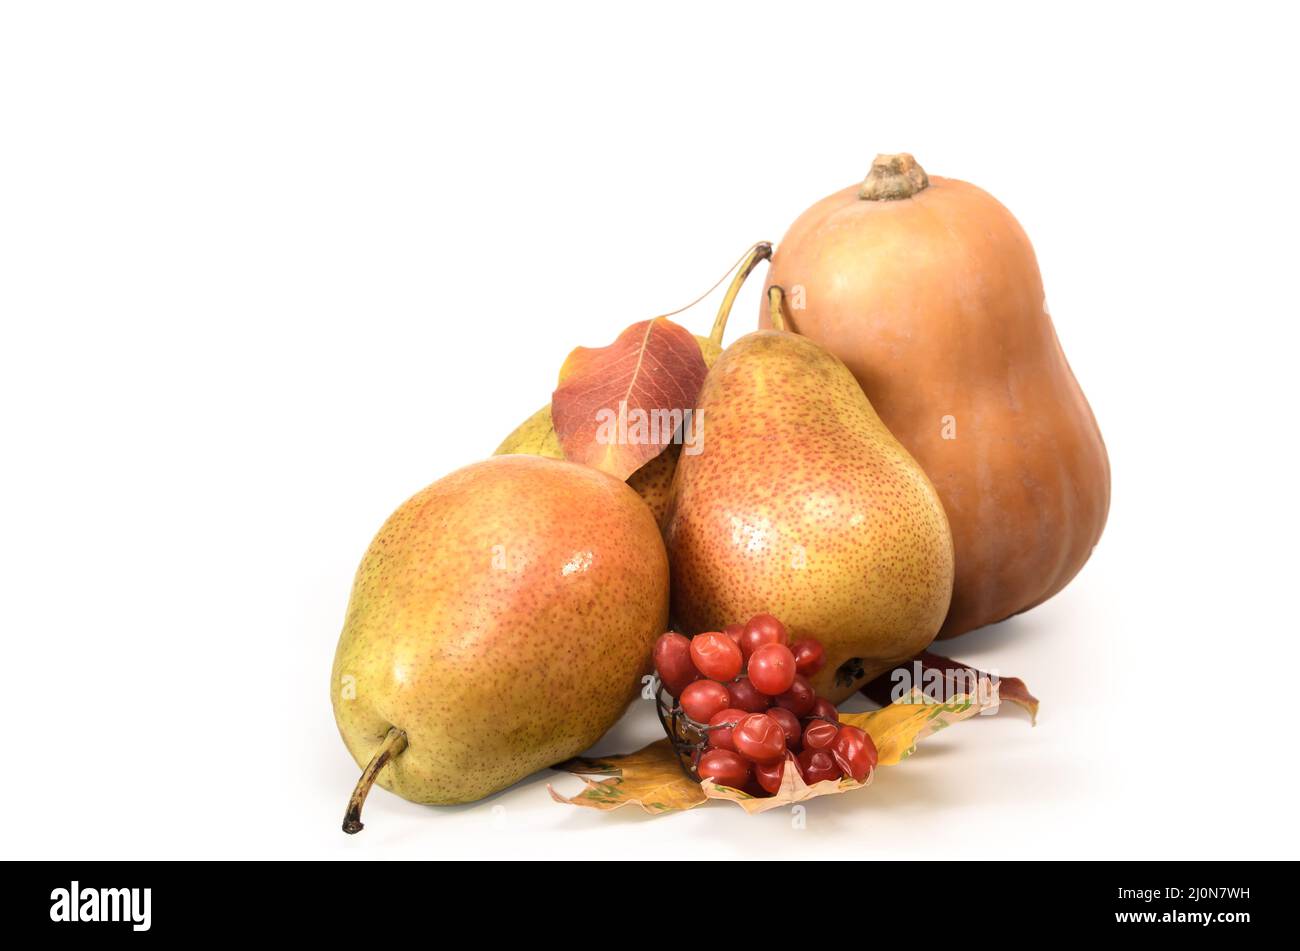 Pears on a white background with soft shadow Stock Photo